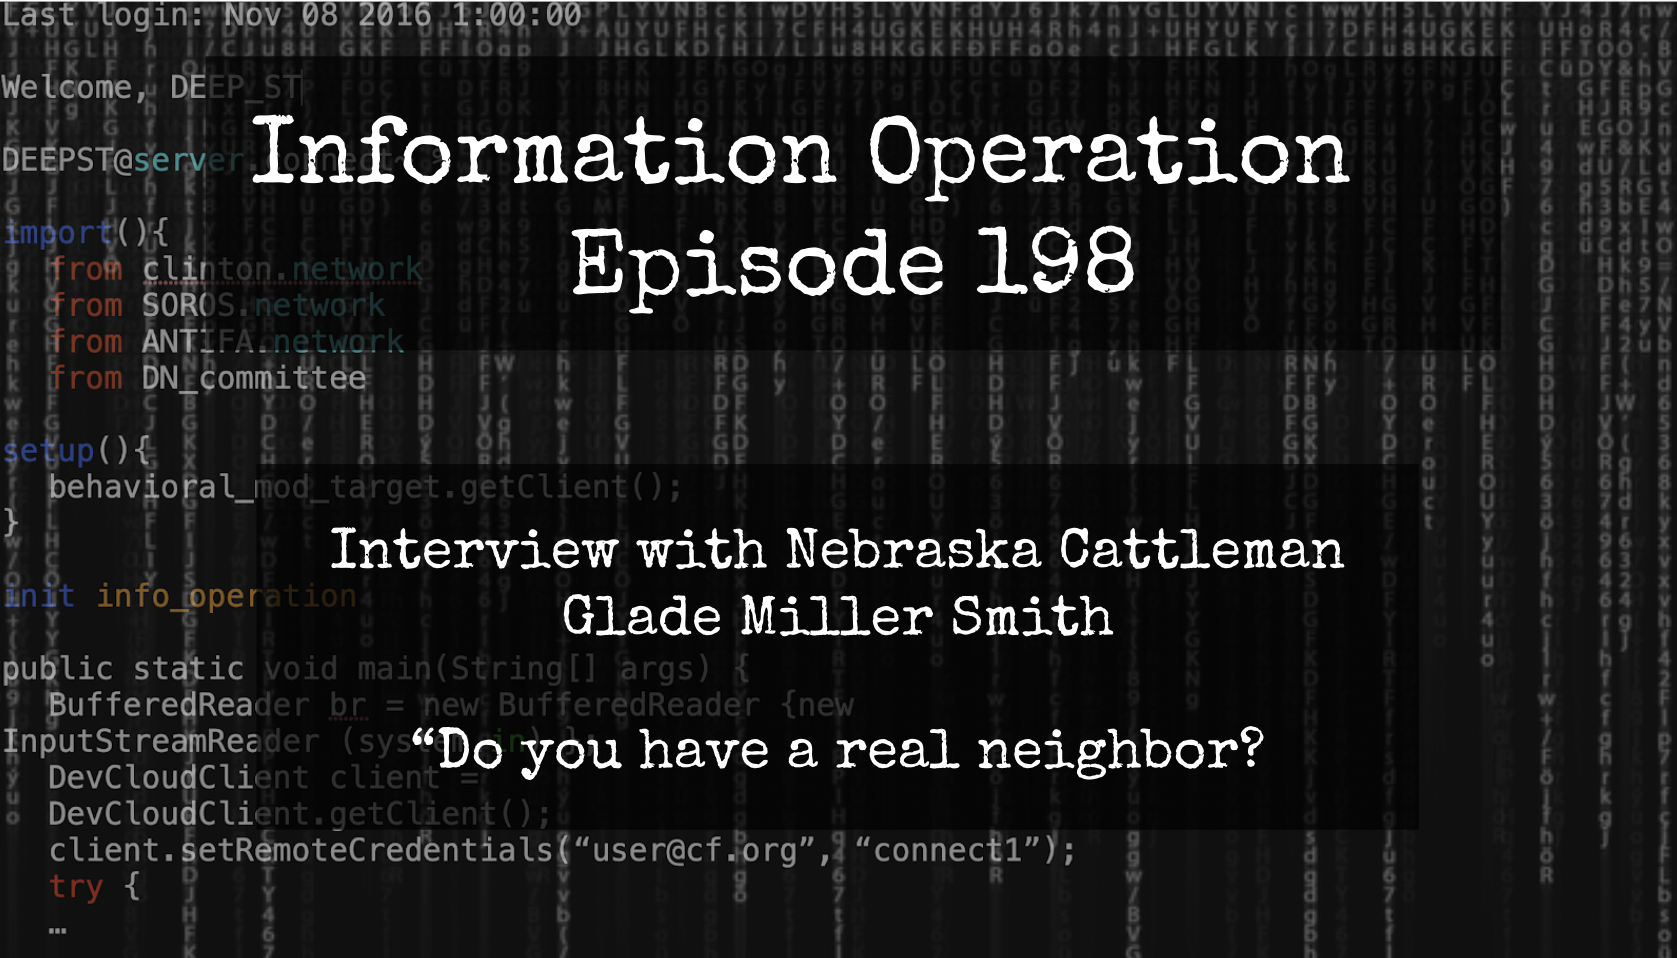 LIVE 5pm EST: Information Operation - Do You Have A Real Neighbor? With Glade Miller Smith